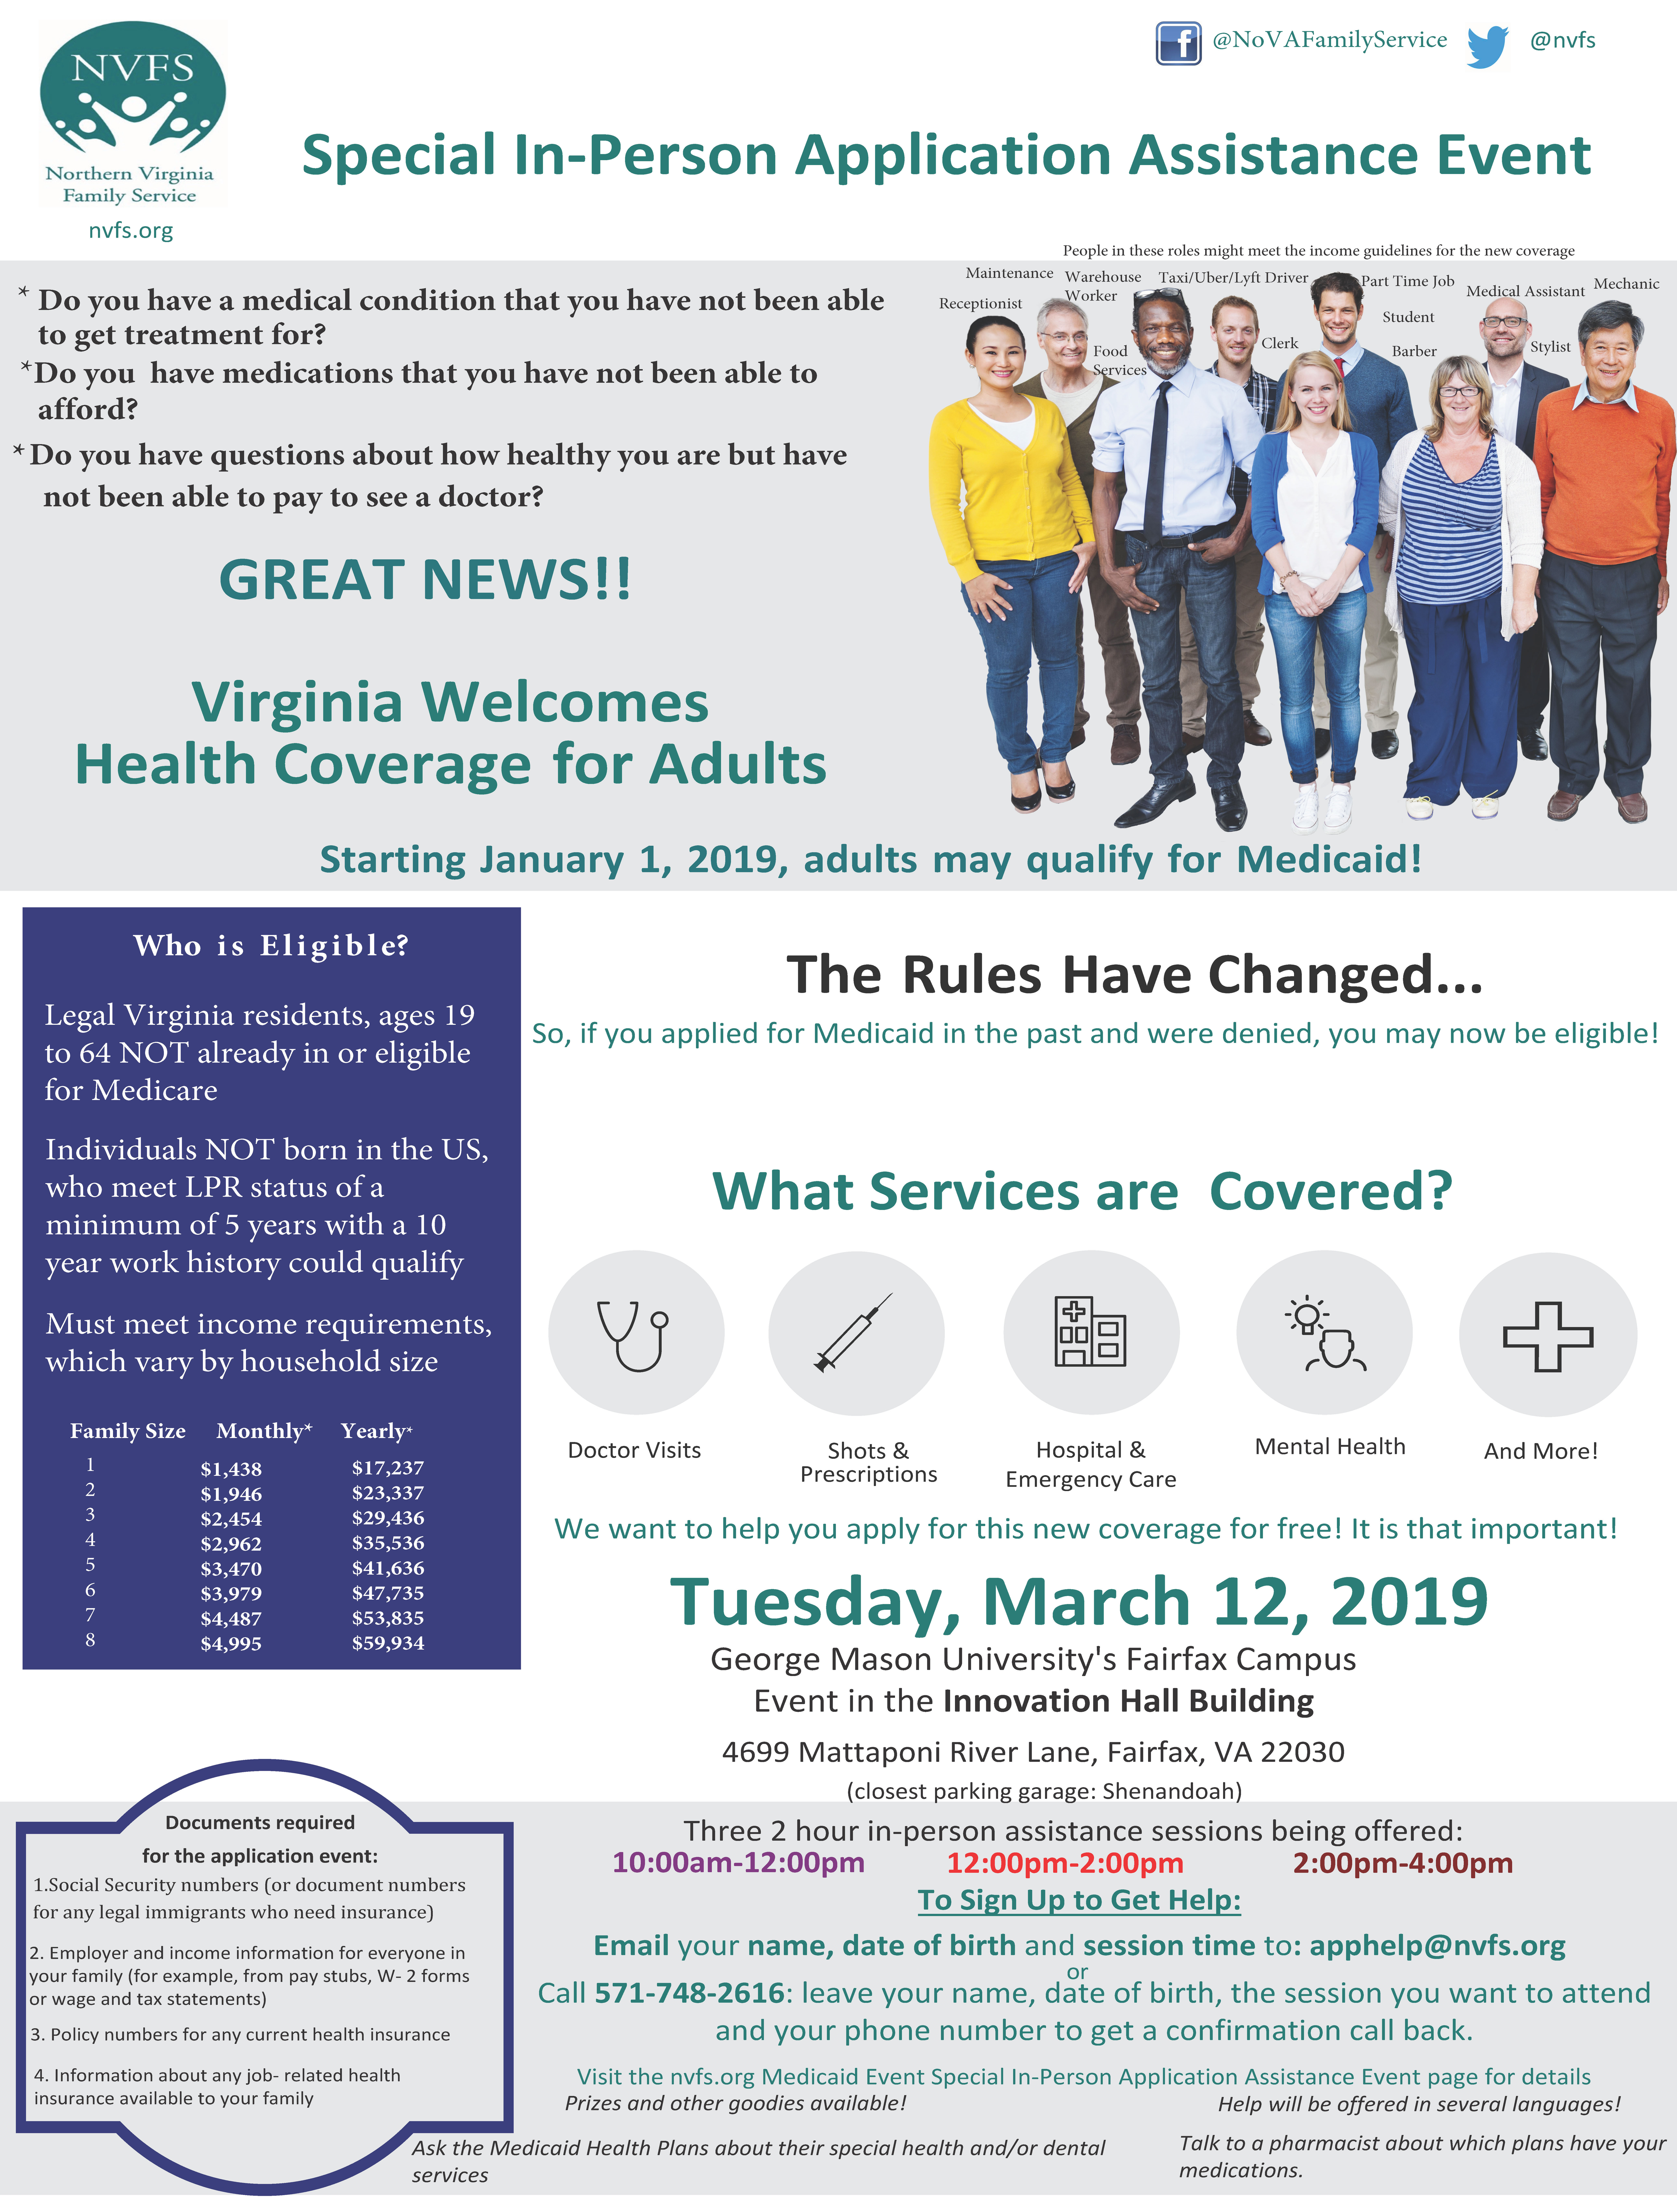 NVFS Application Assistance event on 3-12-19